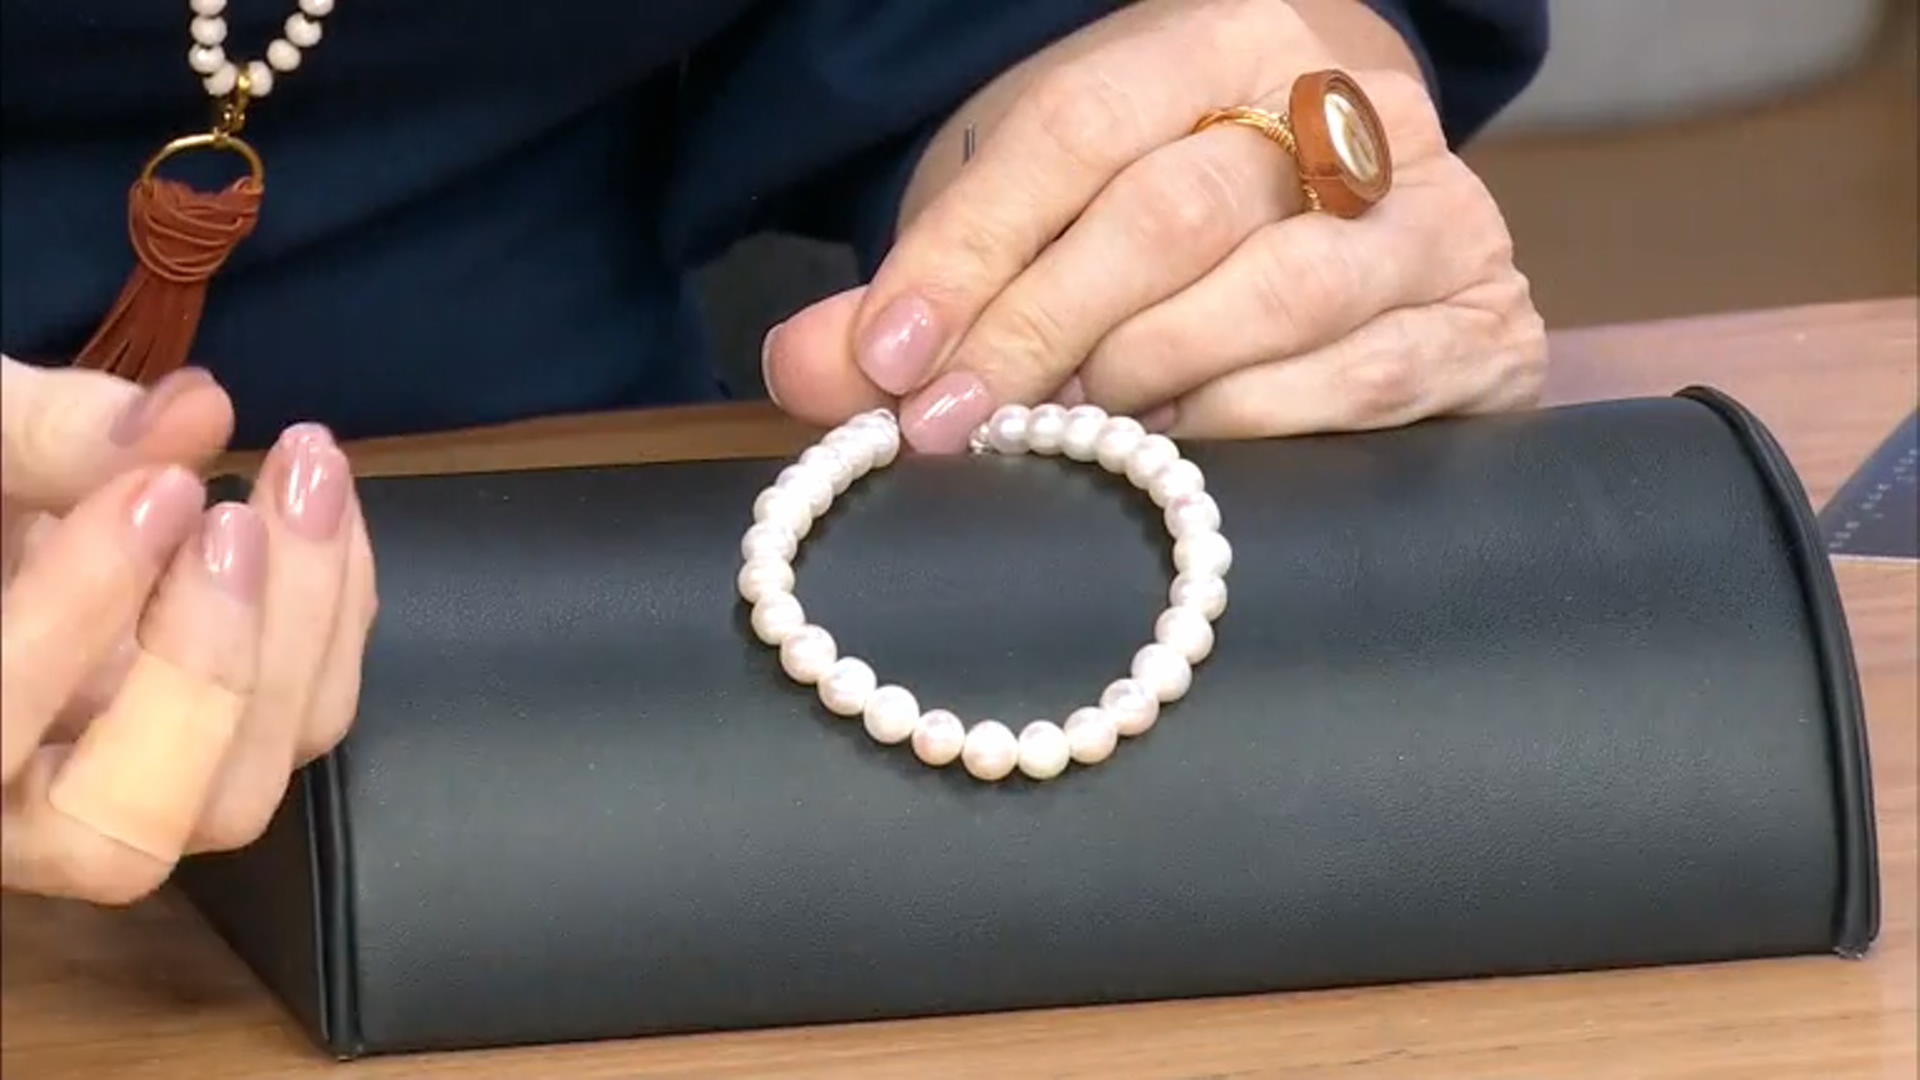 White Cultured Freshwater Pearl Large Hole Potato appx 8-9mm Shape Bead Strand appx 7.5-8" Video Thumbnail